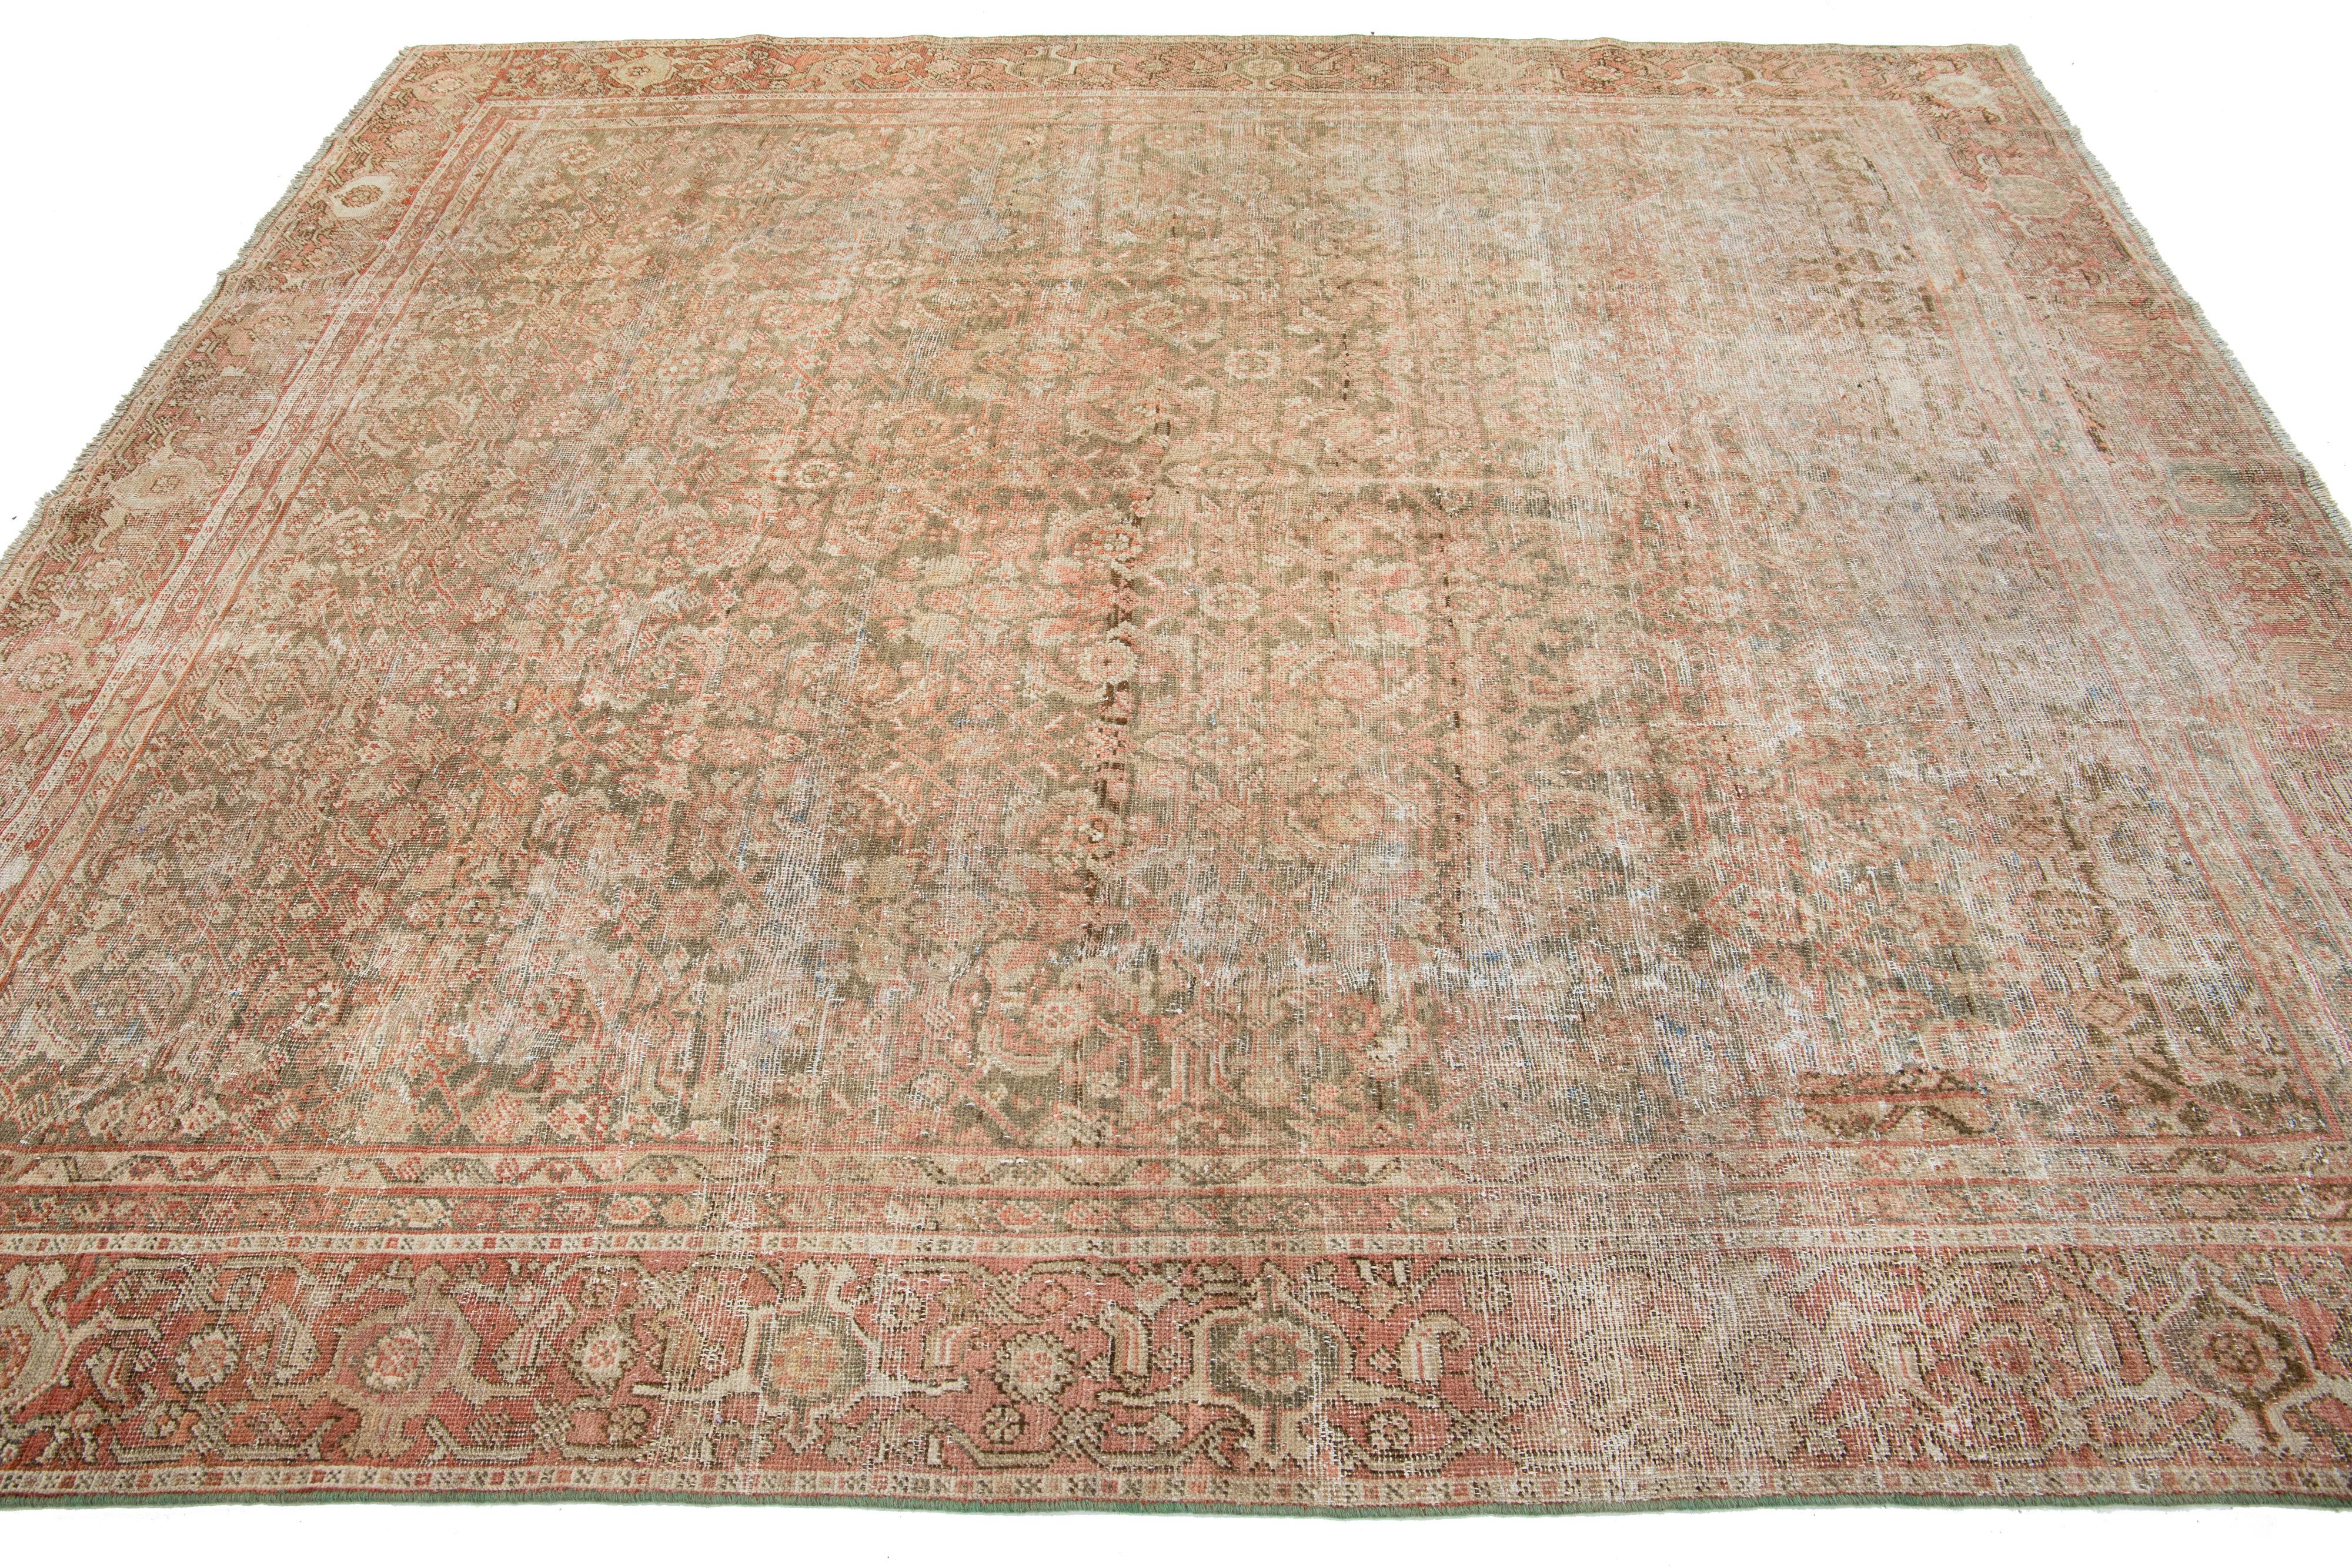 Antique Persian Tabriz Wool Rug with Rust Allover Design from the 1910s In Excellent Condition For Sale In Norwalk, CT